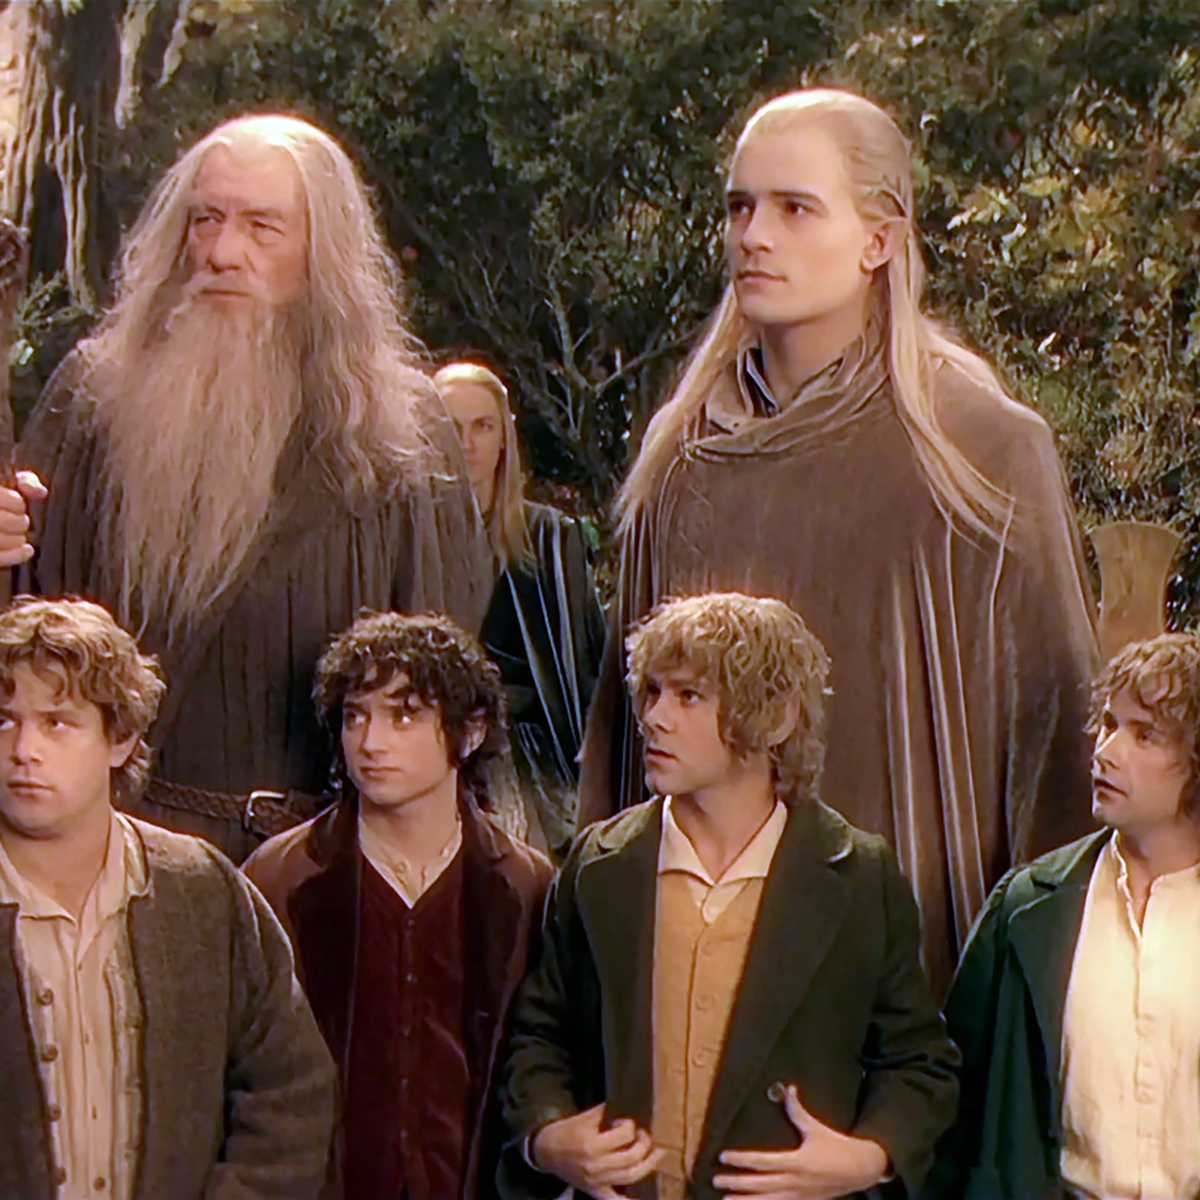 Lord of the Rings: How to watch the whole LOTR saga in